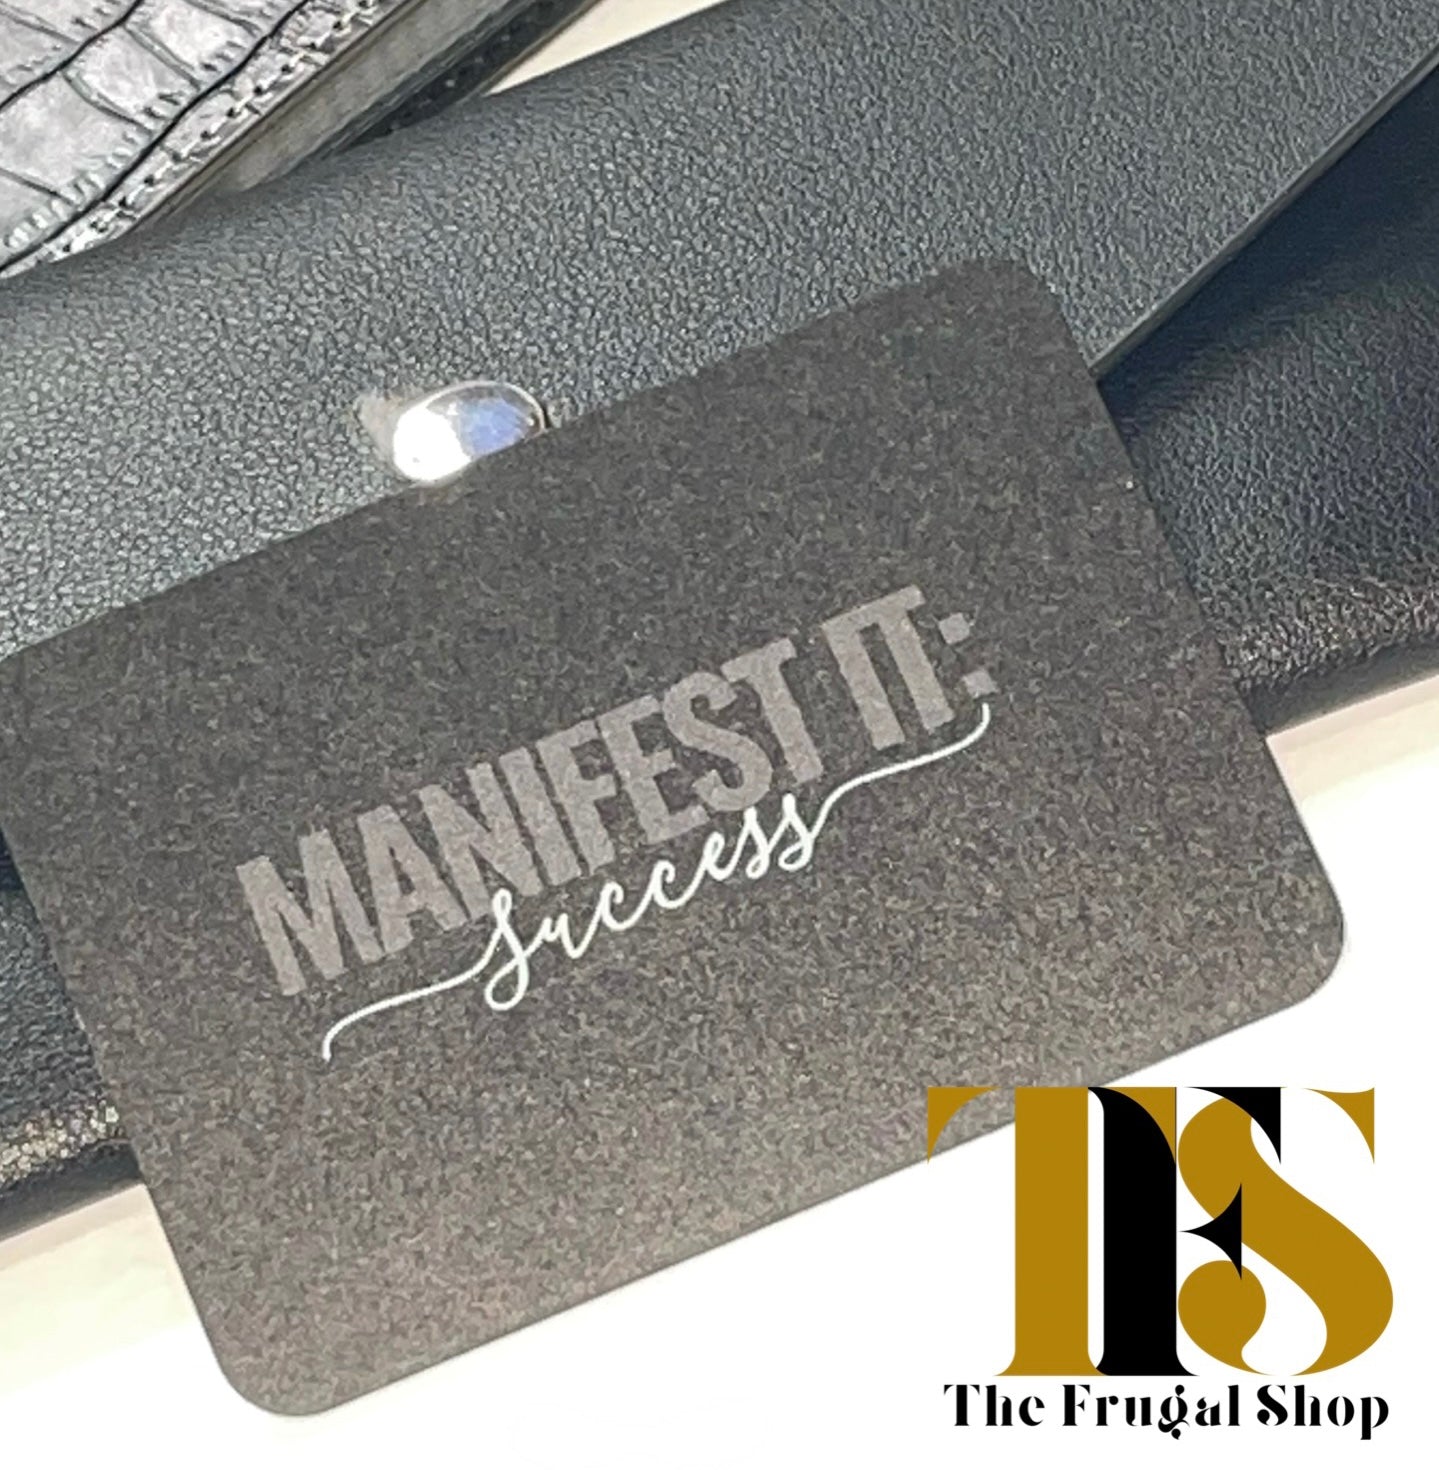 Manifest It Success 5 Ps Double Sided Planner Card